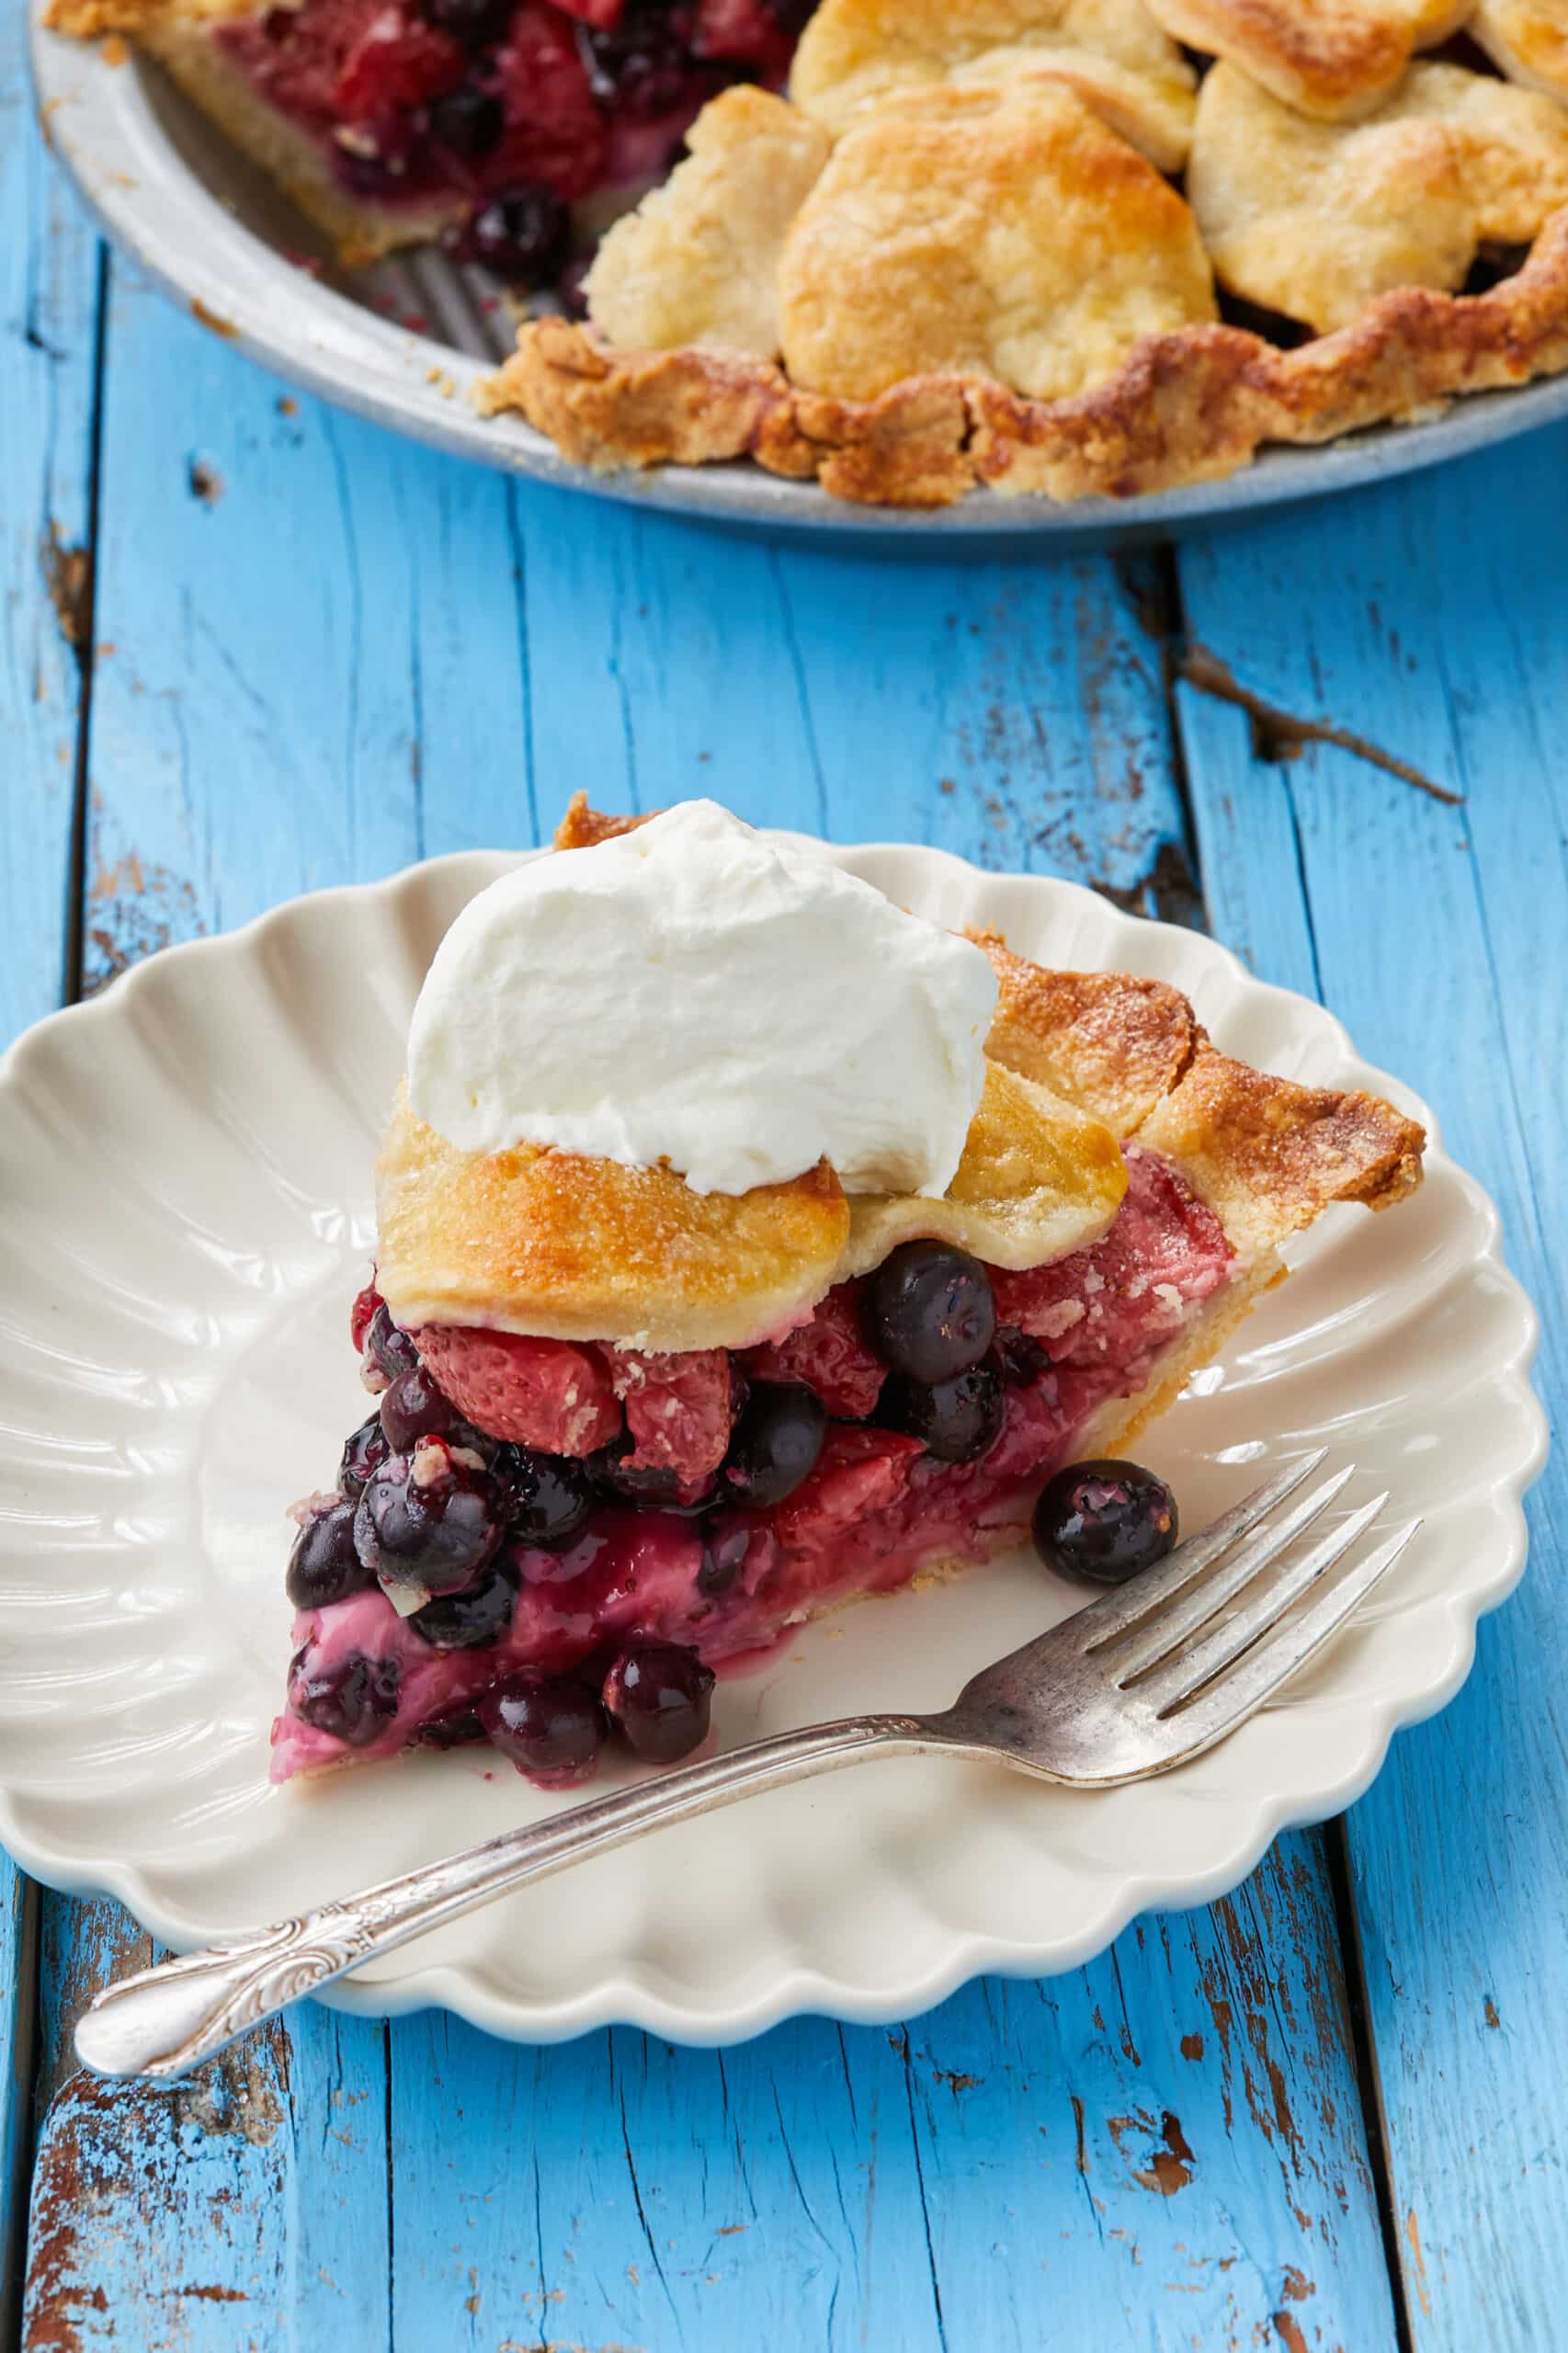 A close-up shot at a slice of the Blueberry Strawberry Pie shows its flaky crust, fruity juicy filling, served with a dollop of whipped cream.